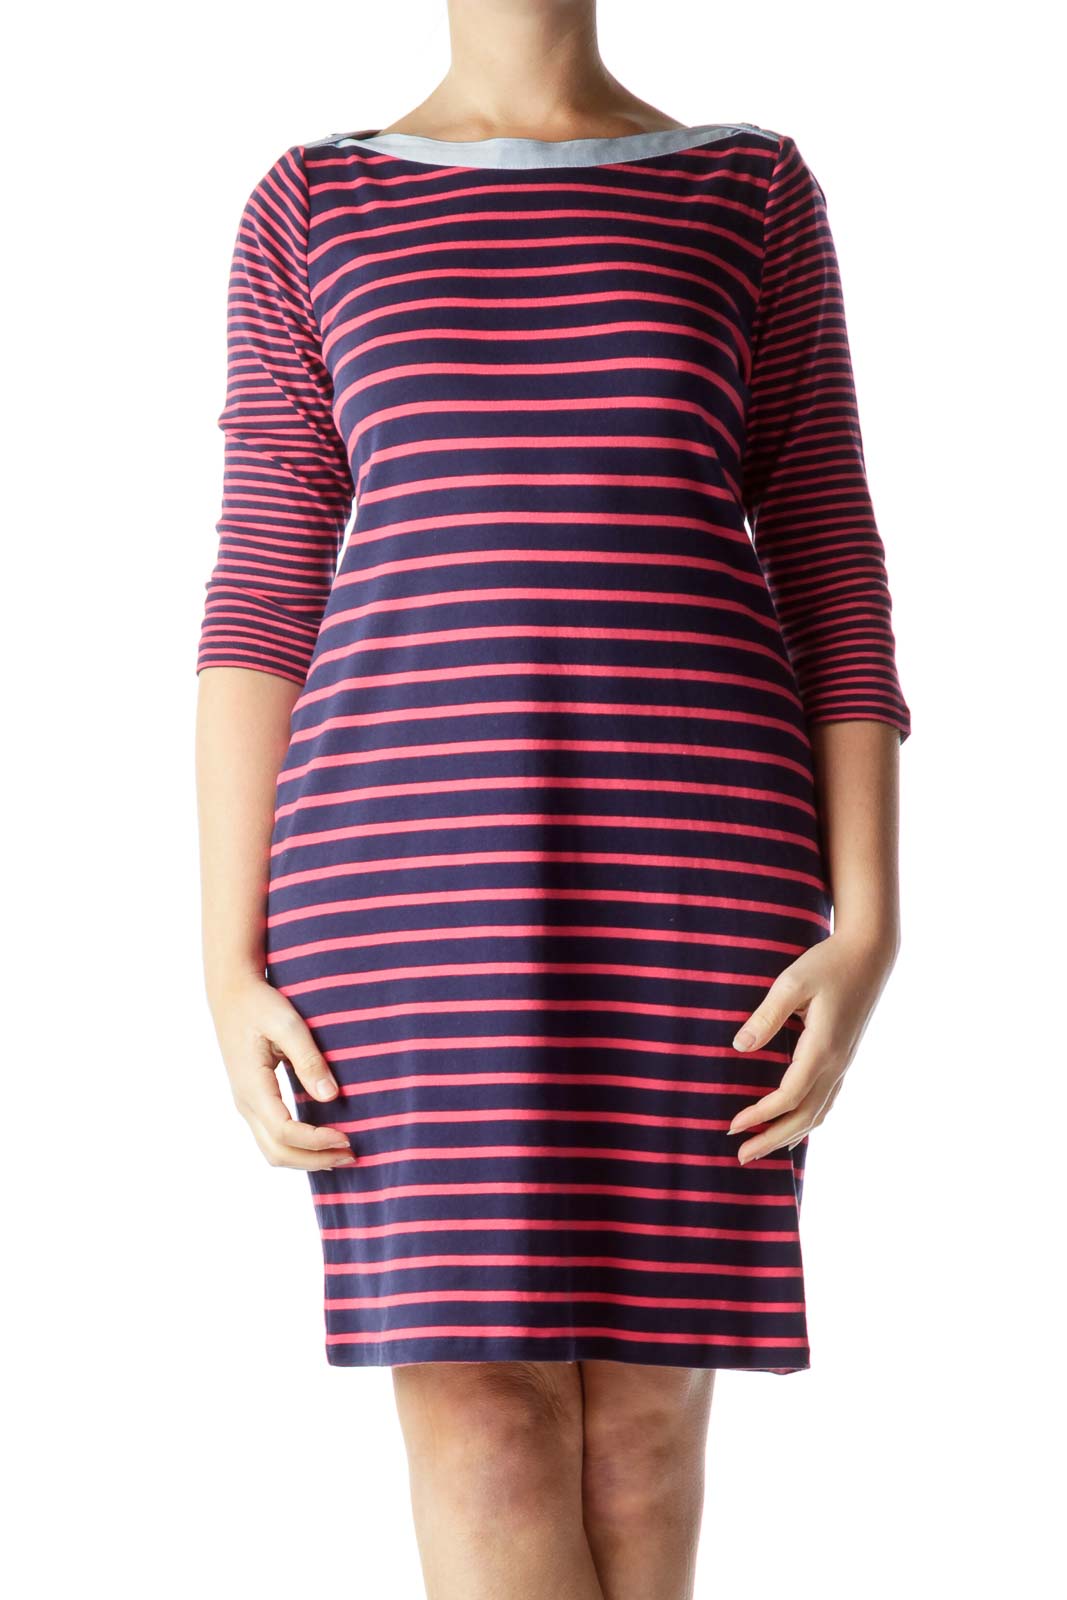 Navy Striped Cotton Dress Front